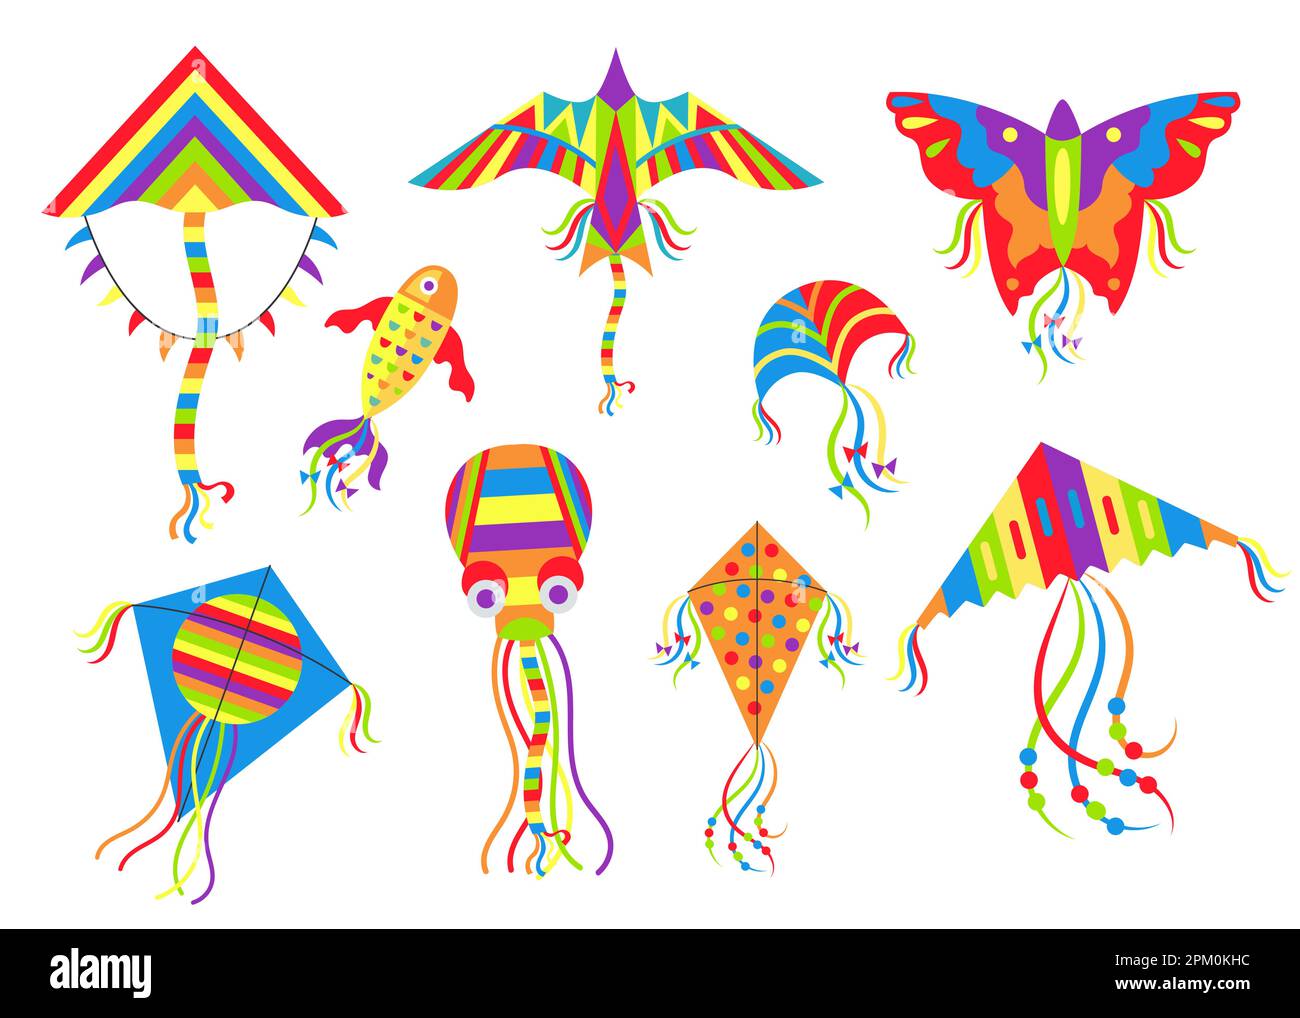 Kites of different types vector illustrations set Stock Vector